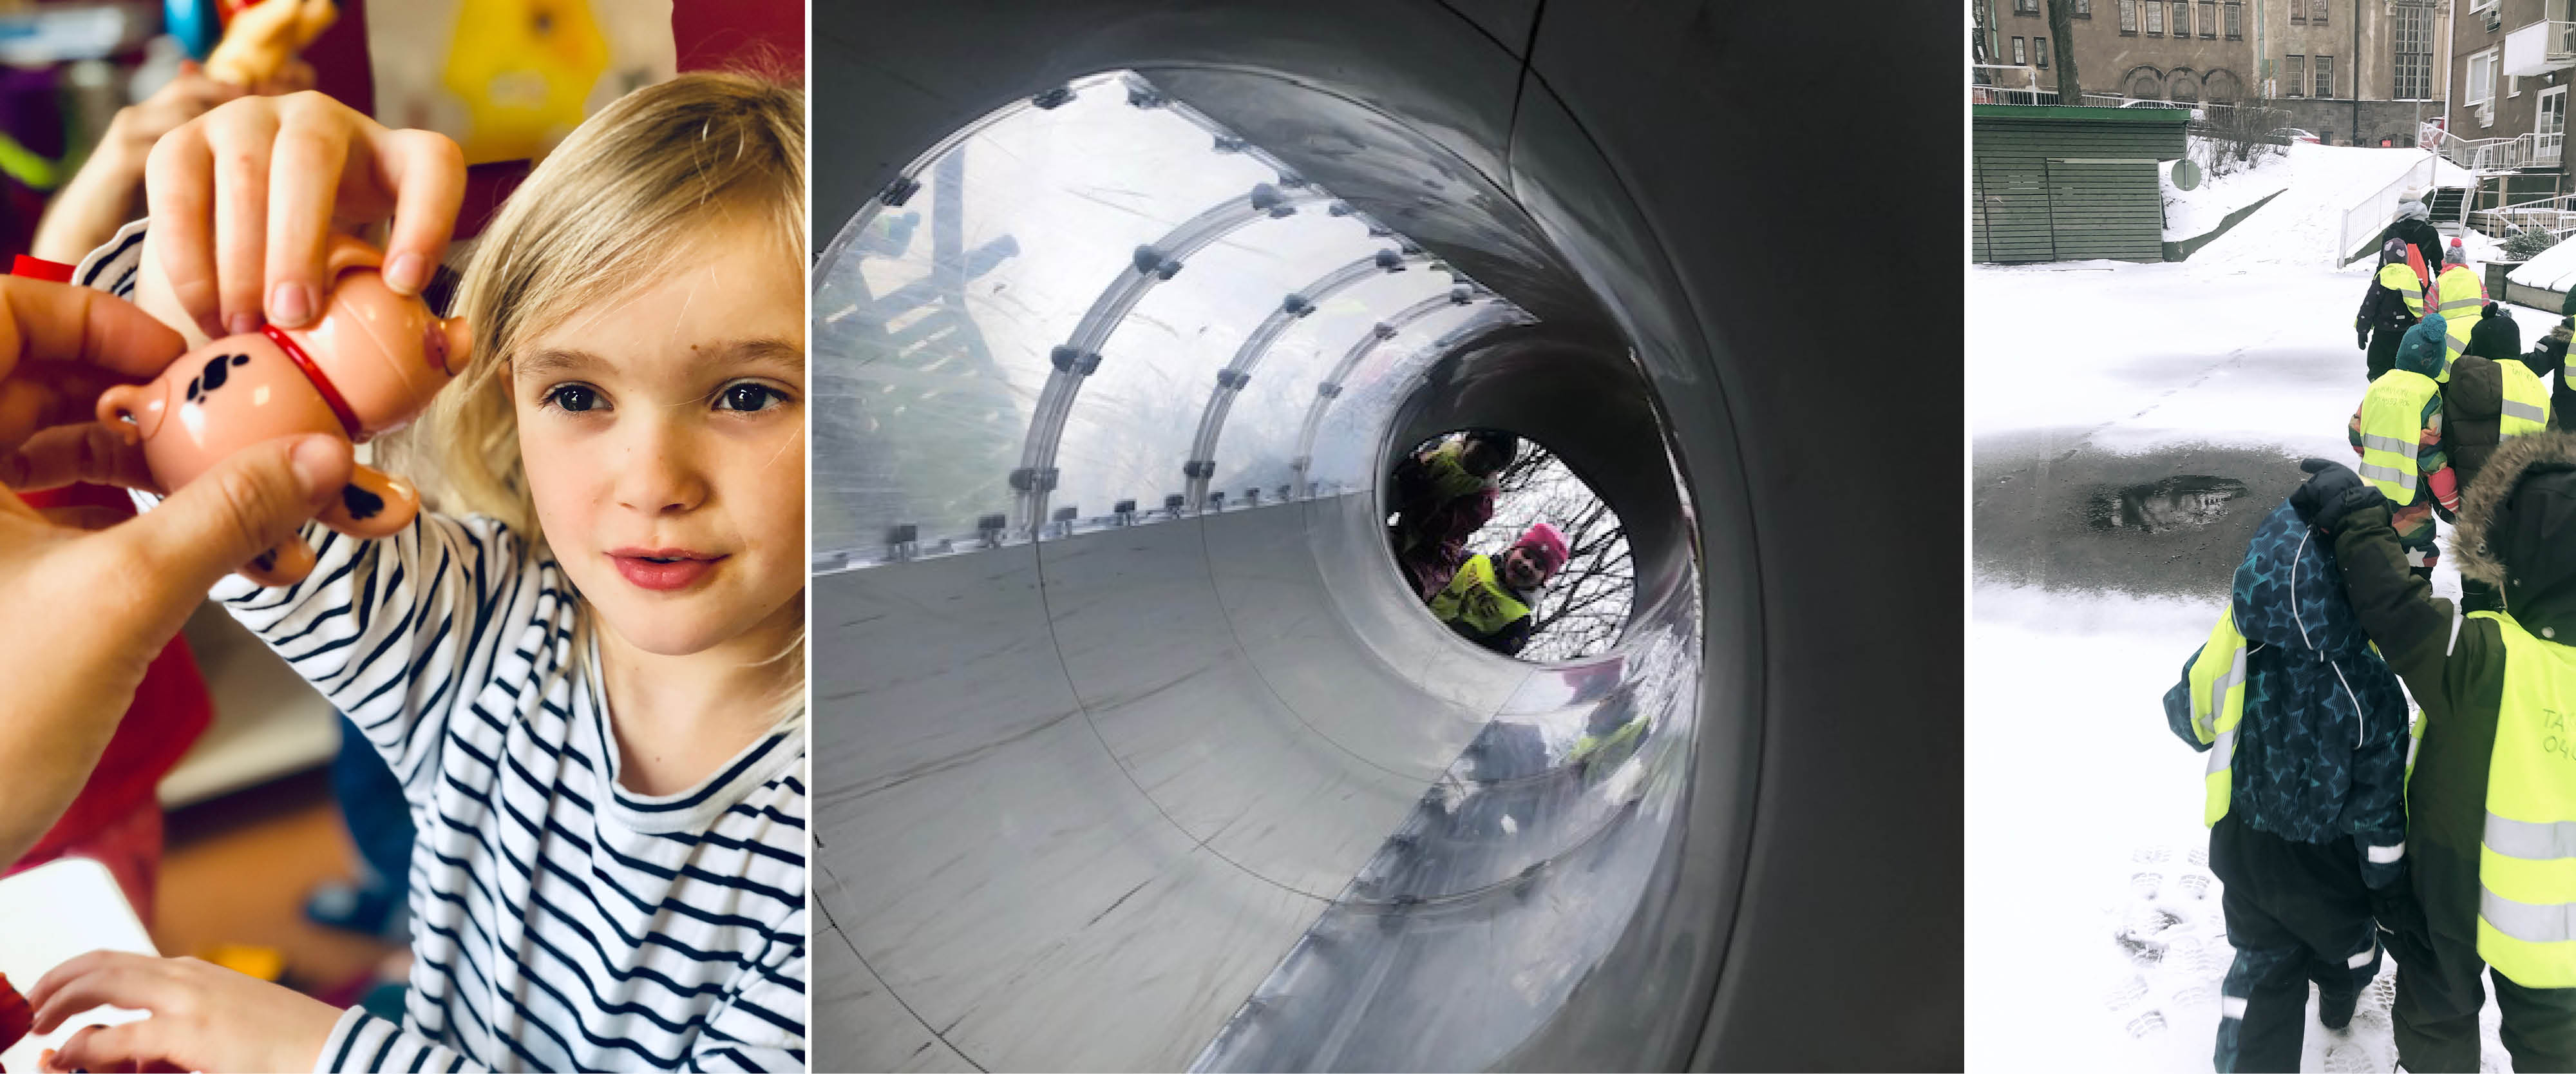 Three photos: on the left, a blonde-haired child wearing a striped shirt taking an animal figure from someone's hand, who is offering it to them. Center. A view up to a tunnel slide, there a two children looking down from the top of the tube. Right: Finnish kindergarteners wearing high-visibility vests during a winter day.